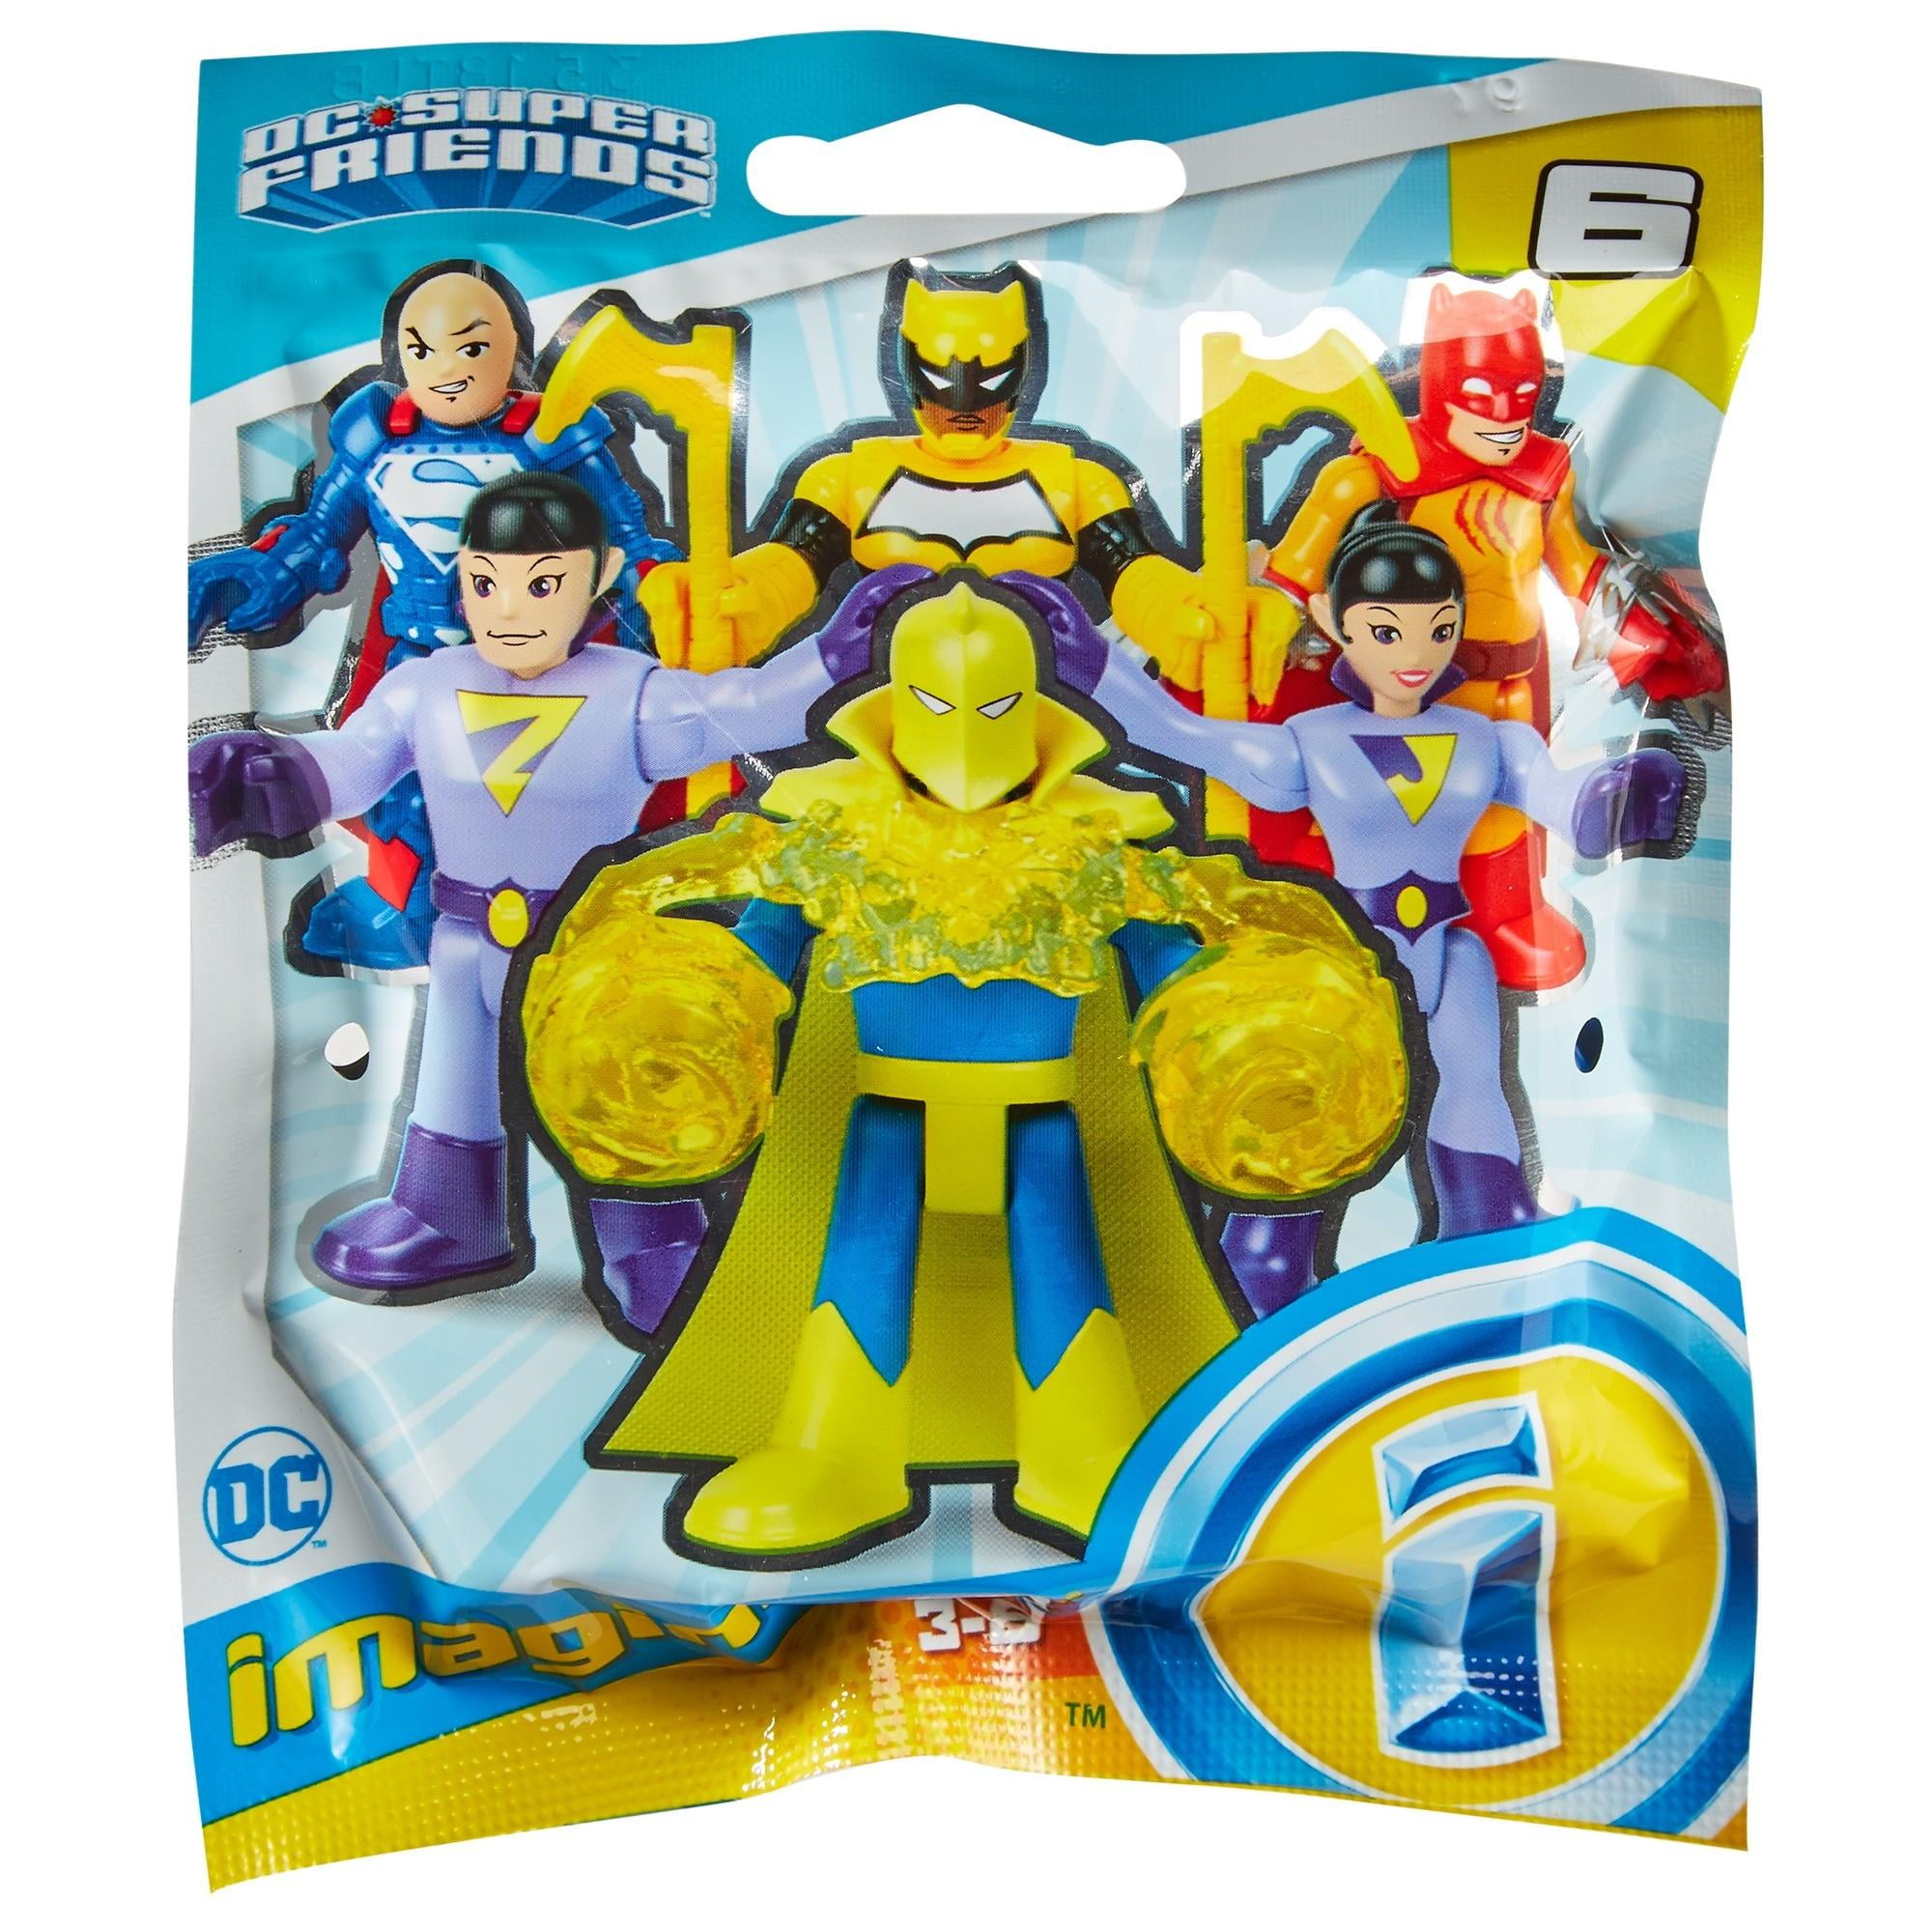 Imaginext DC Super Friends Action Figures FREE SHIPPING 